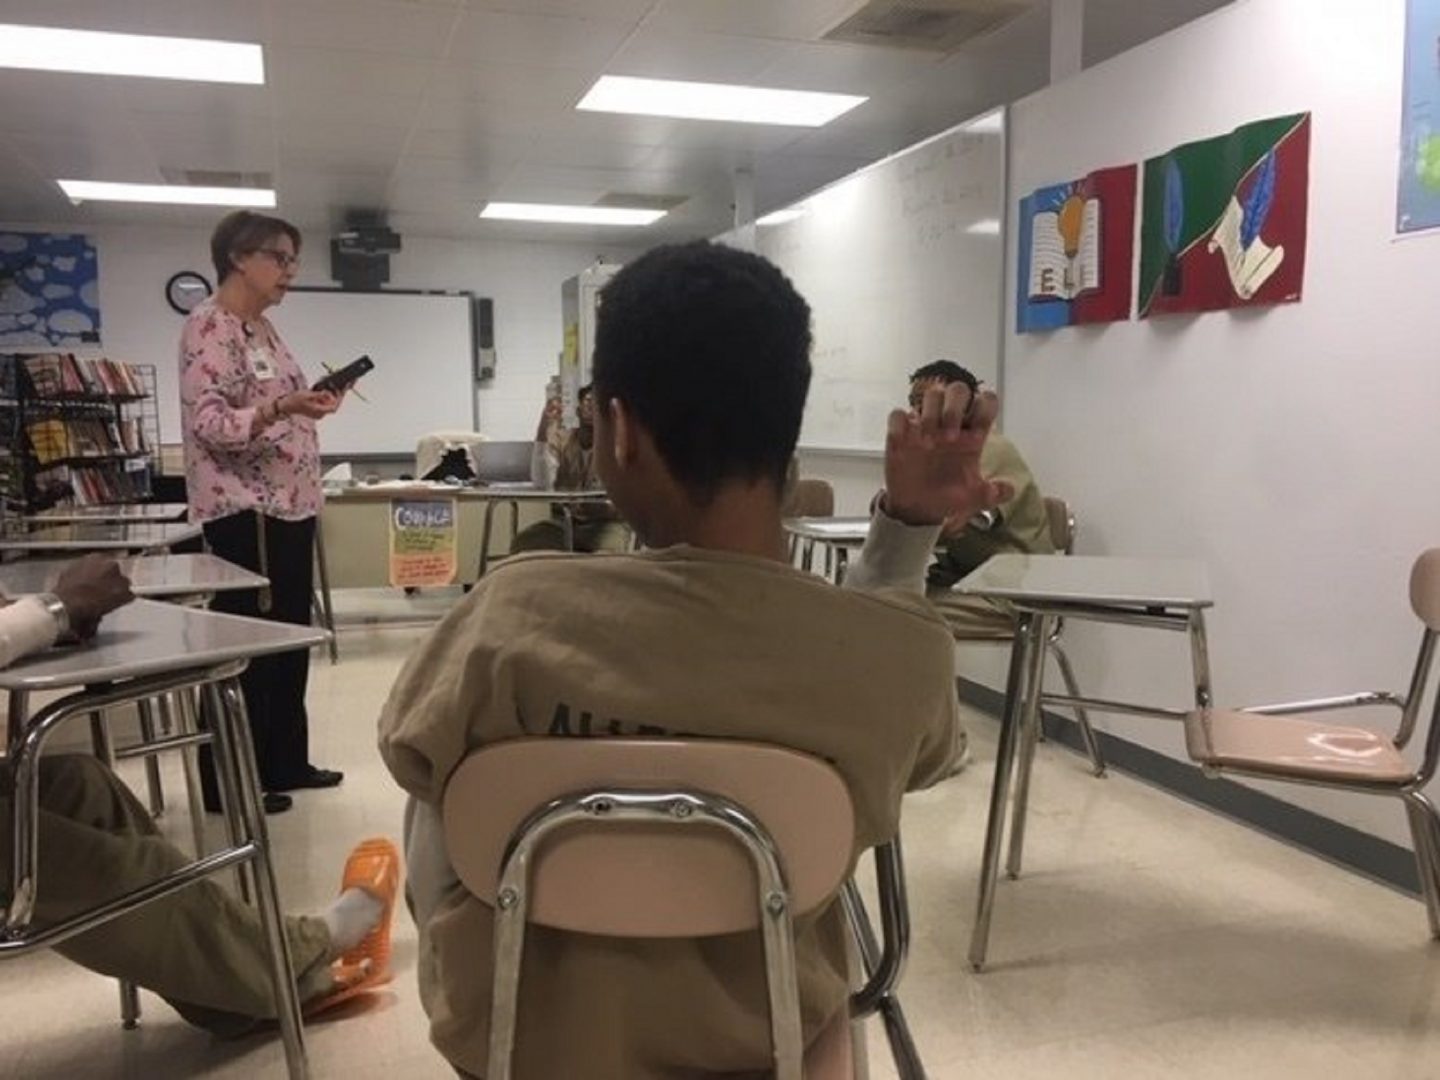 Kristine Autenreith teaches Language Arts to juveniles at the Allegheny County Jail. The students are in the jail because they're being tried as adults for crimes such as murder, rape and robbery.
